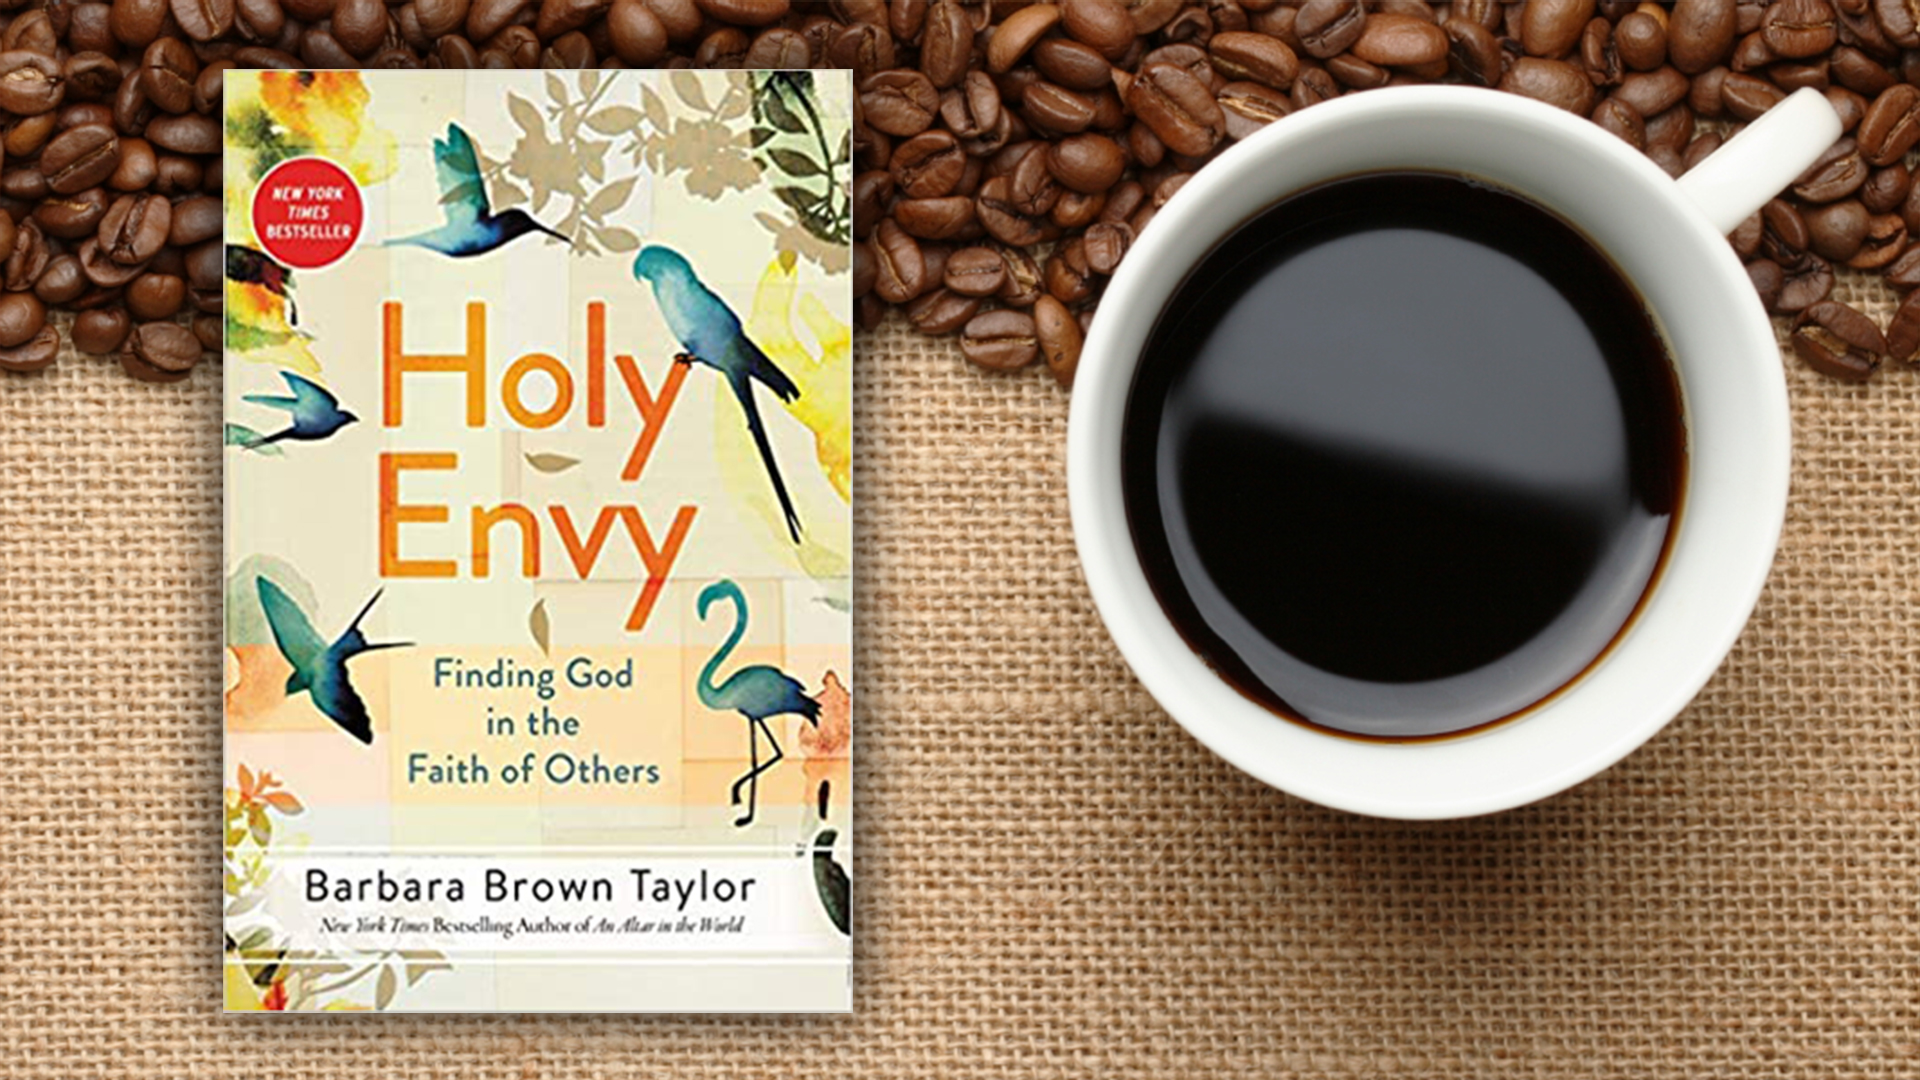 Theology, Thoughts & Coffee
Book Study: Holy Envy: Finding God in the Faith of Others by Barbara Brown Taylor
